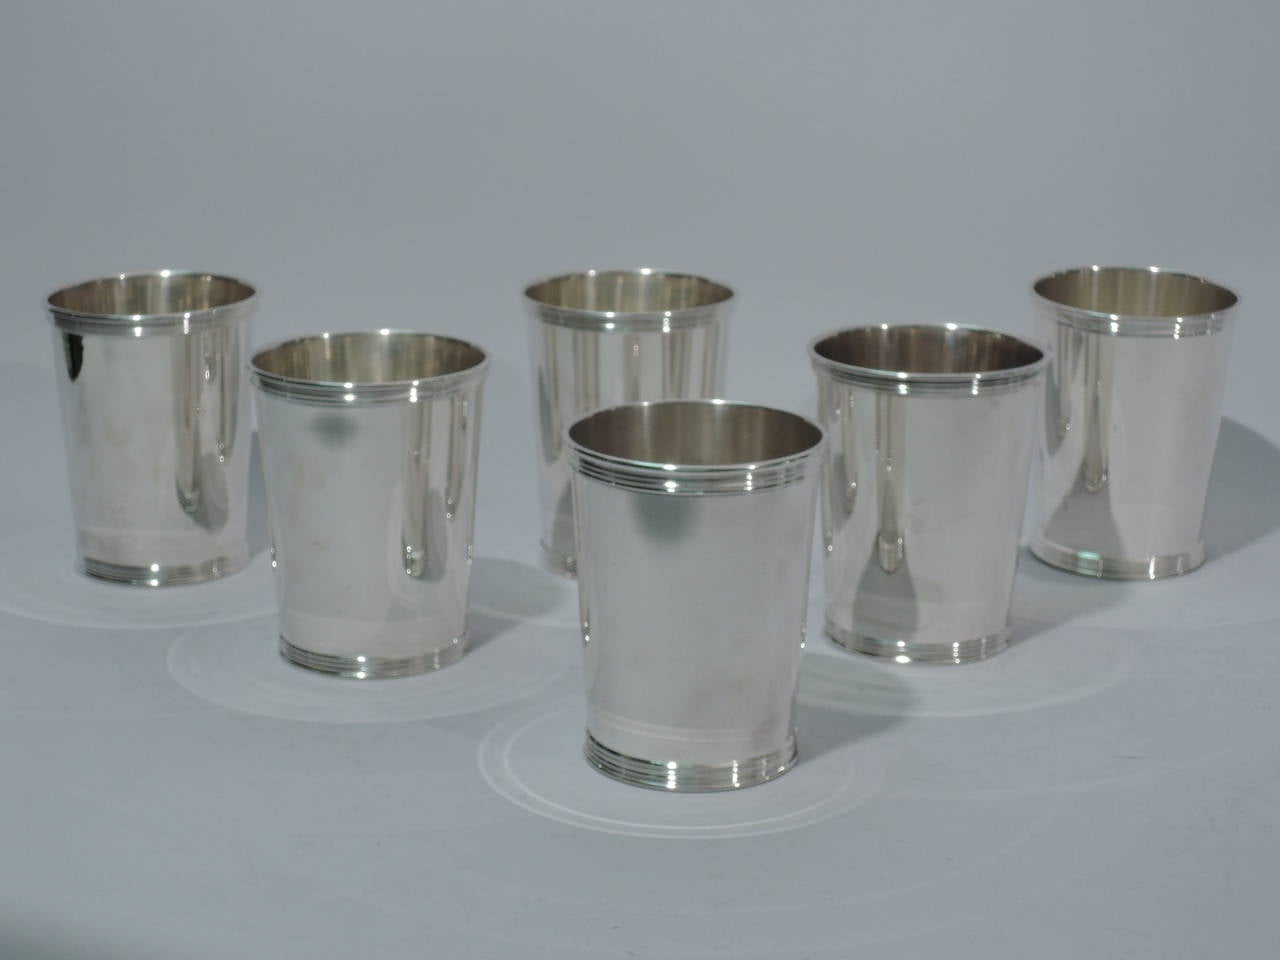 Set of 6 sterling silver mint julep cups. Made by Manchester in Providence, ca. 1950.Each straight and tapering sides, and reeded rim and foot. Hallmark includes no. 3759S. Excellent condition.

Dimensions: H 3 3/4 x D 3 in. Total weight:25.3 troy